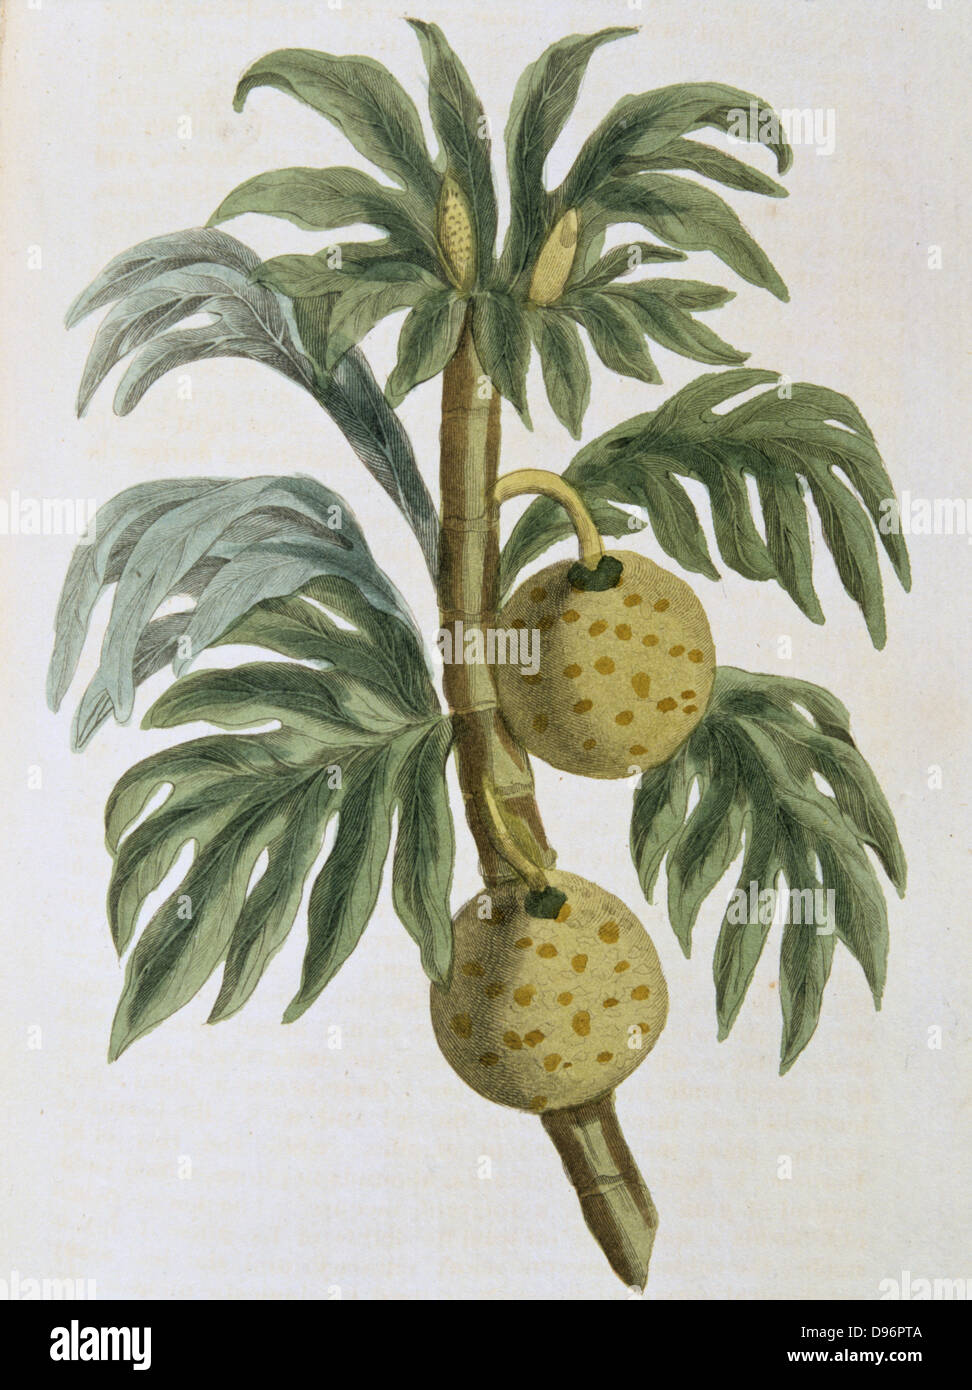 Breadfuit: Artocarpus incisus.  Tree with fruit with white pulp like new bread, introduced into West Indies as important food crop for plantation slaves. Captain Bligh of HMS 'Bounty' fame was given task of transporting stock plants from the South Sea Islands. From 'Nature Displayed' by Simeon Shaw. (London, 1823). Hand coloured engraving. Stock Photo